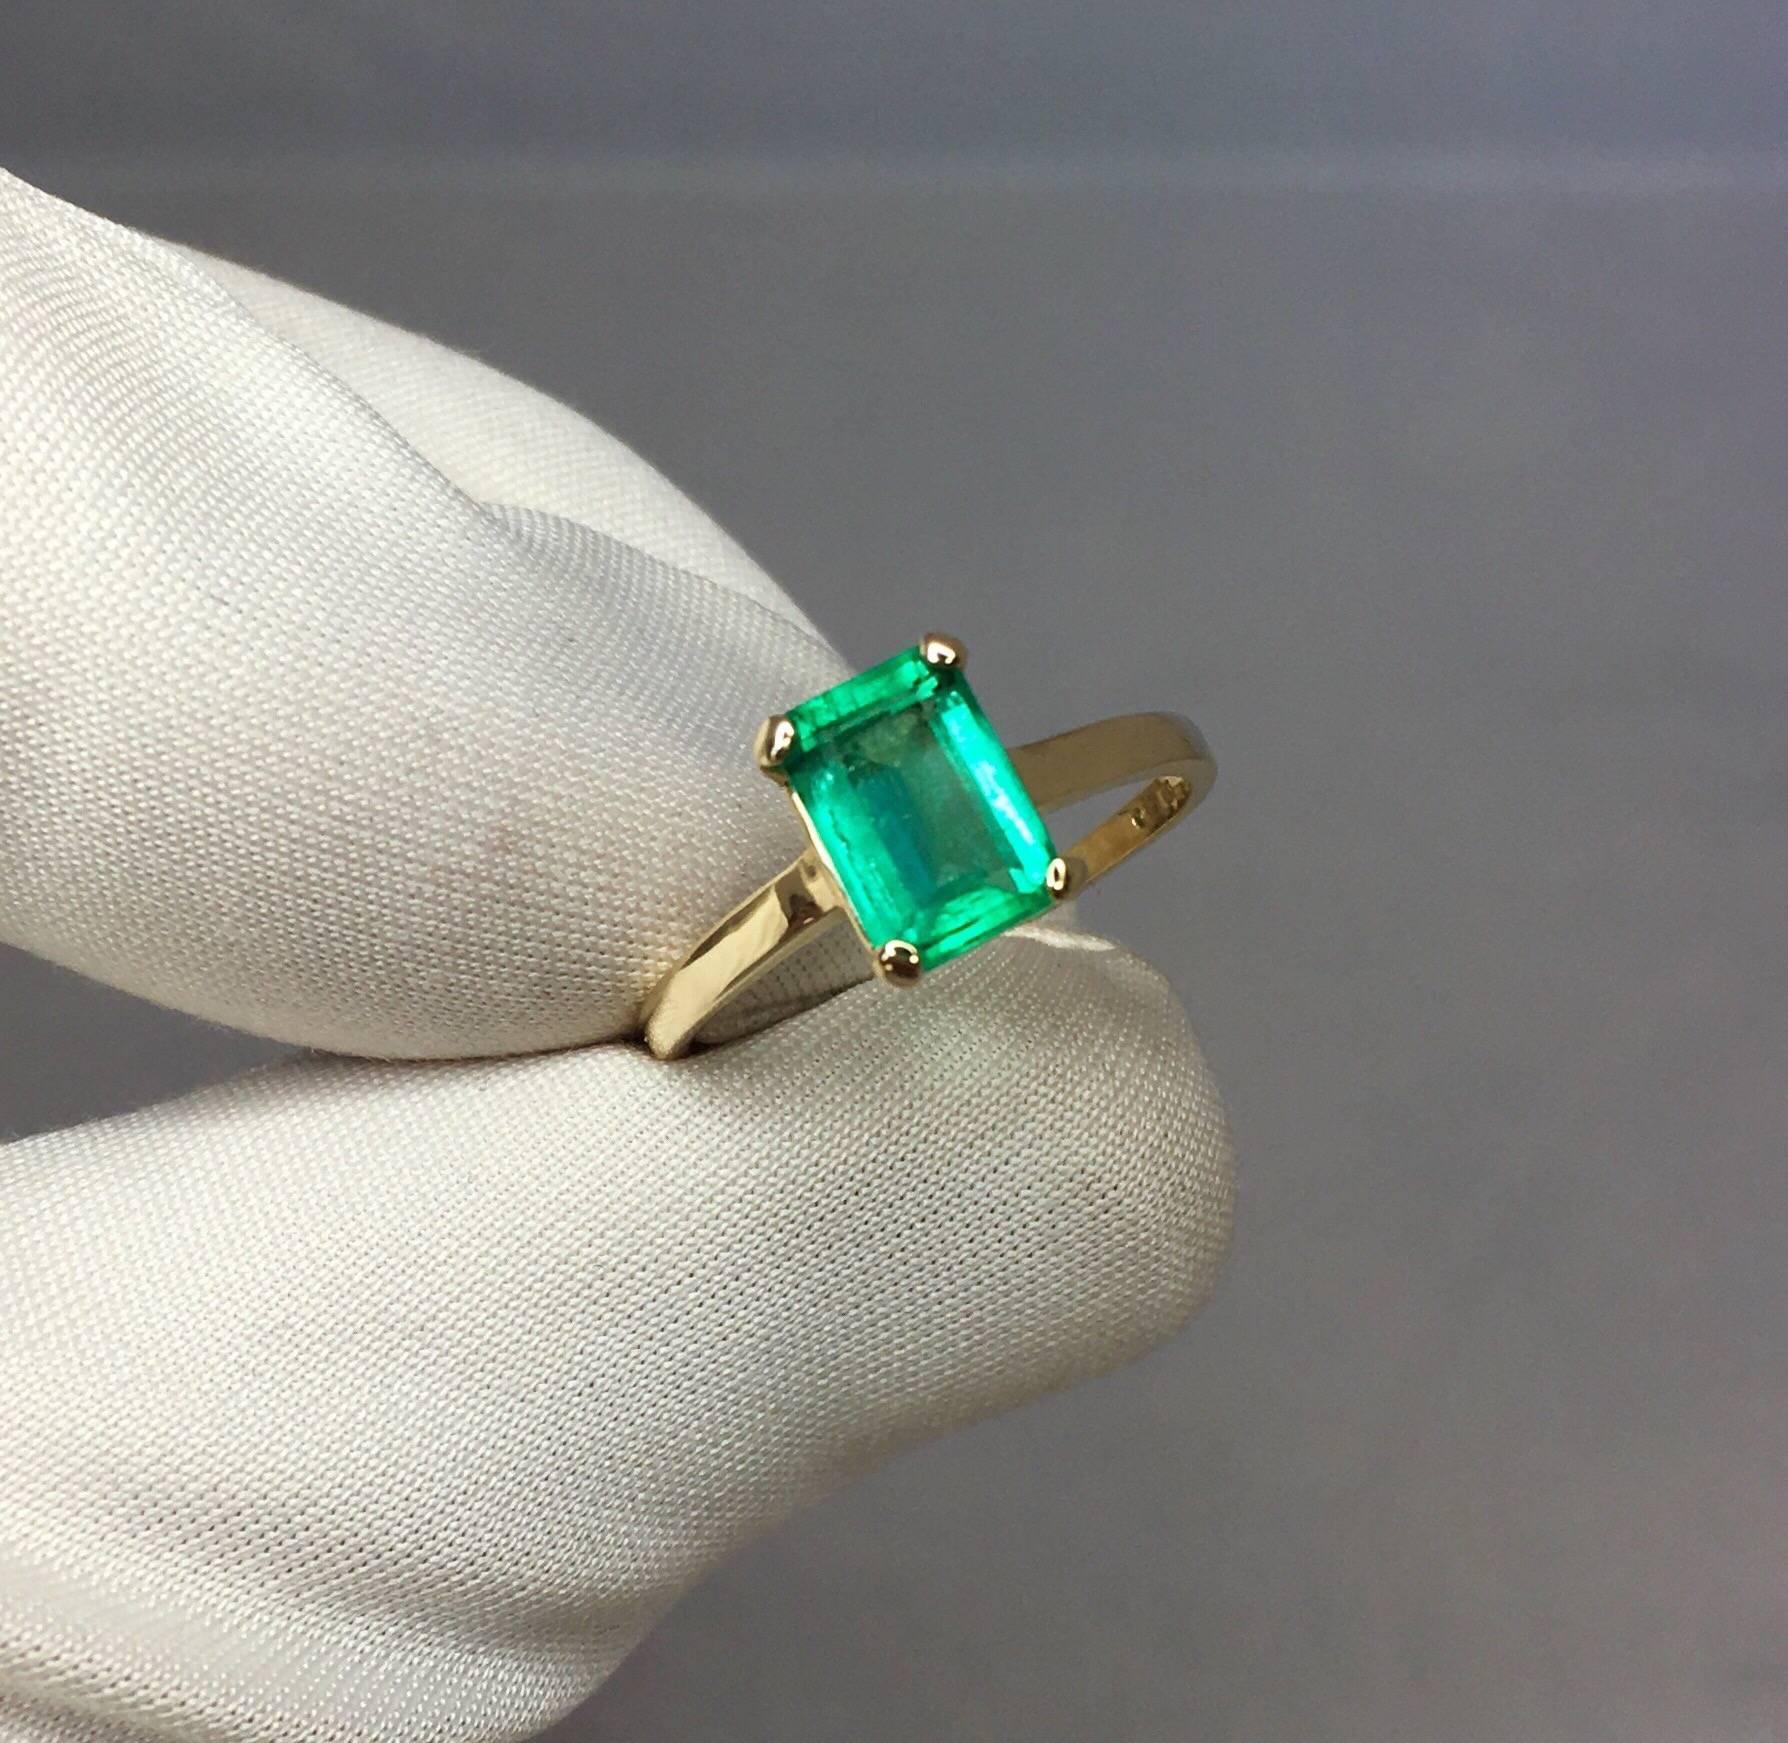 Fine natural vivid green Colombian emerald solitaire ring.

1.17 carat stone with stunning vivid green colour and very good clarity. Obviously some inclusions as to be expected with natural emeralds, but a clean stone by emerald standards. Also with